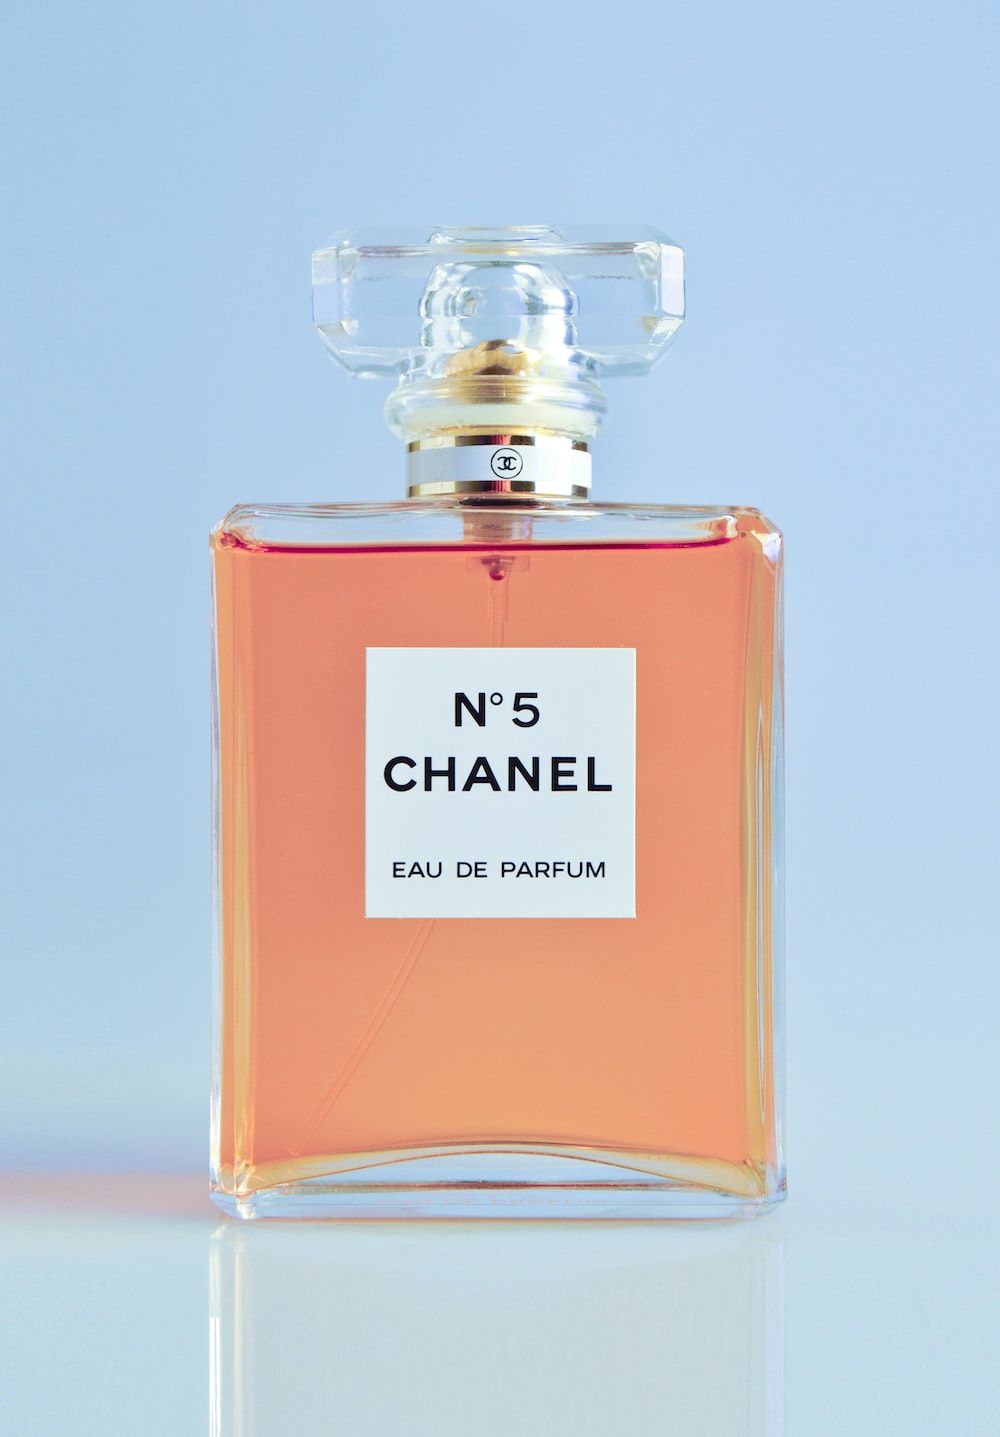 Chanel Perfume Picture. Download Free Image